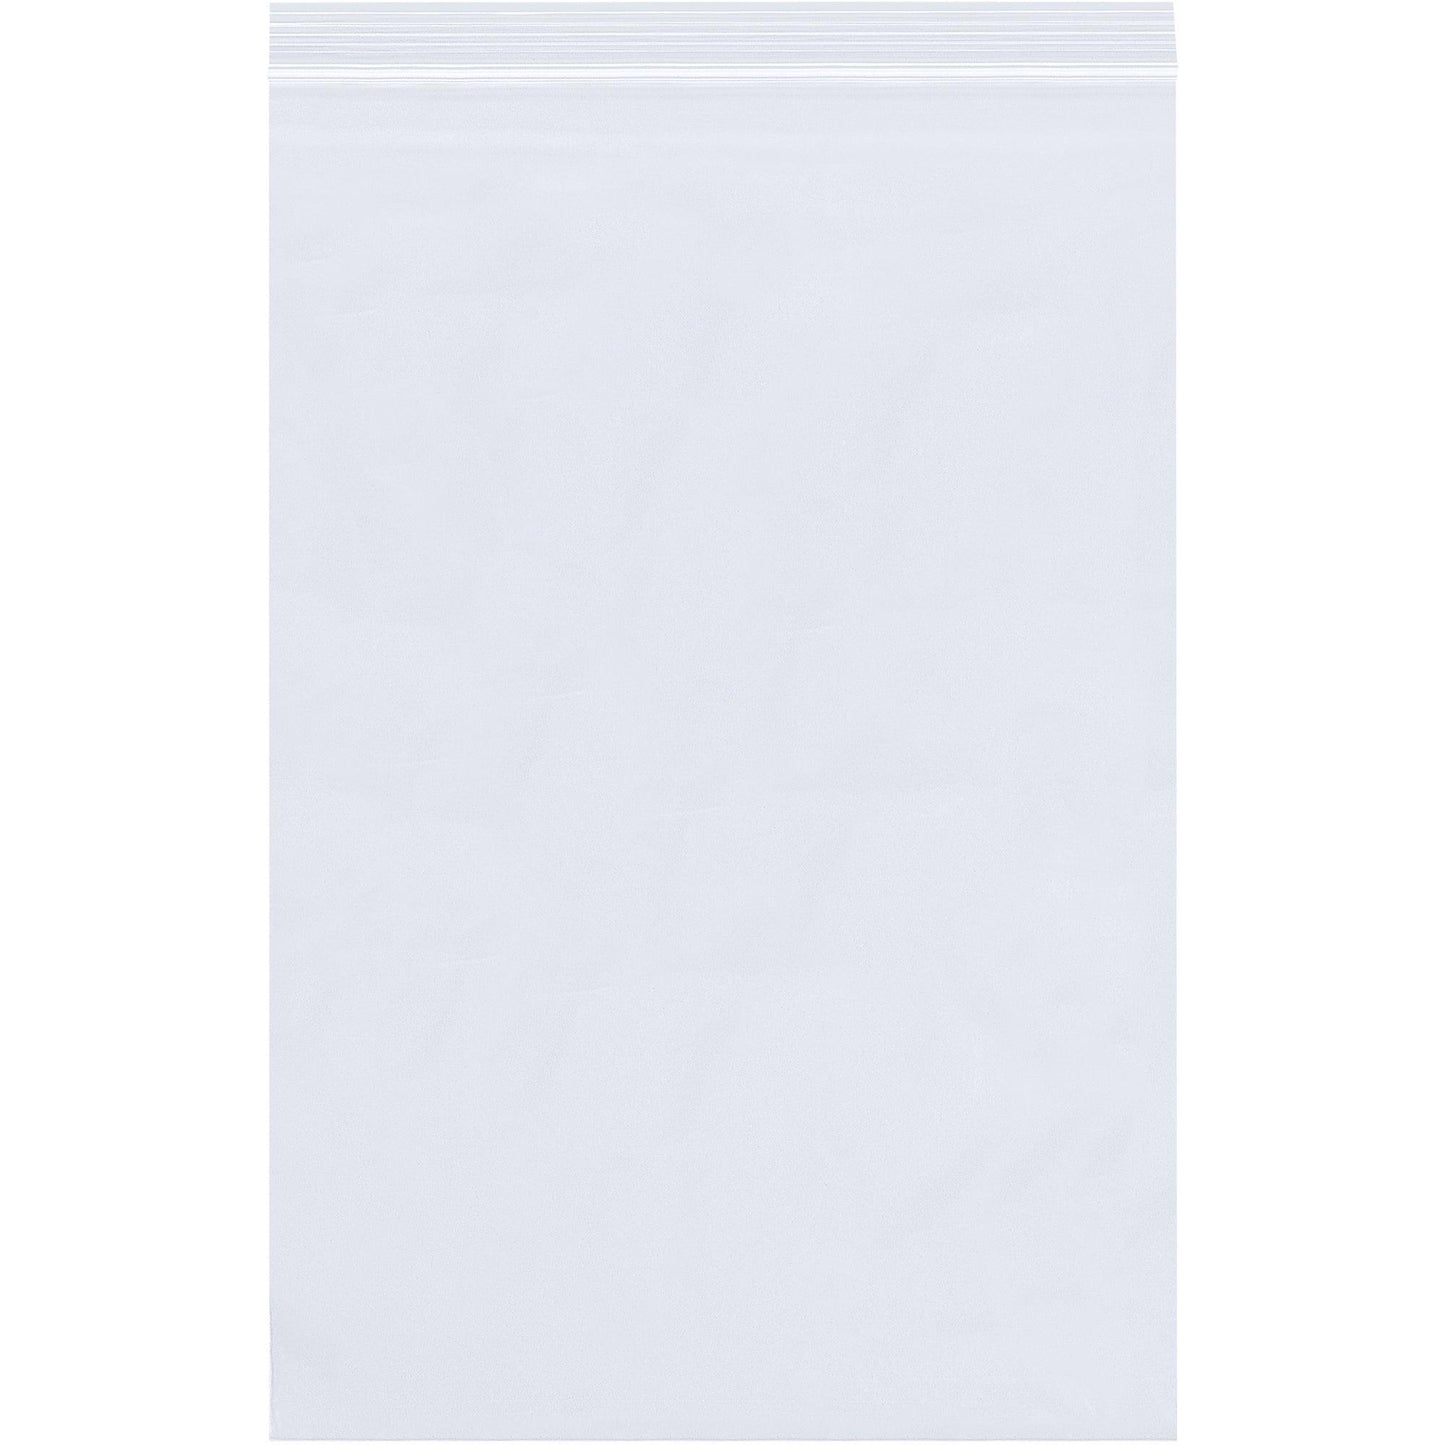 5 x 12" - 6 Mil Reclosable Poly Bags - PB4262